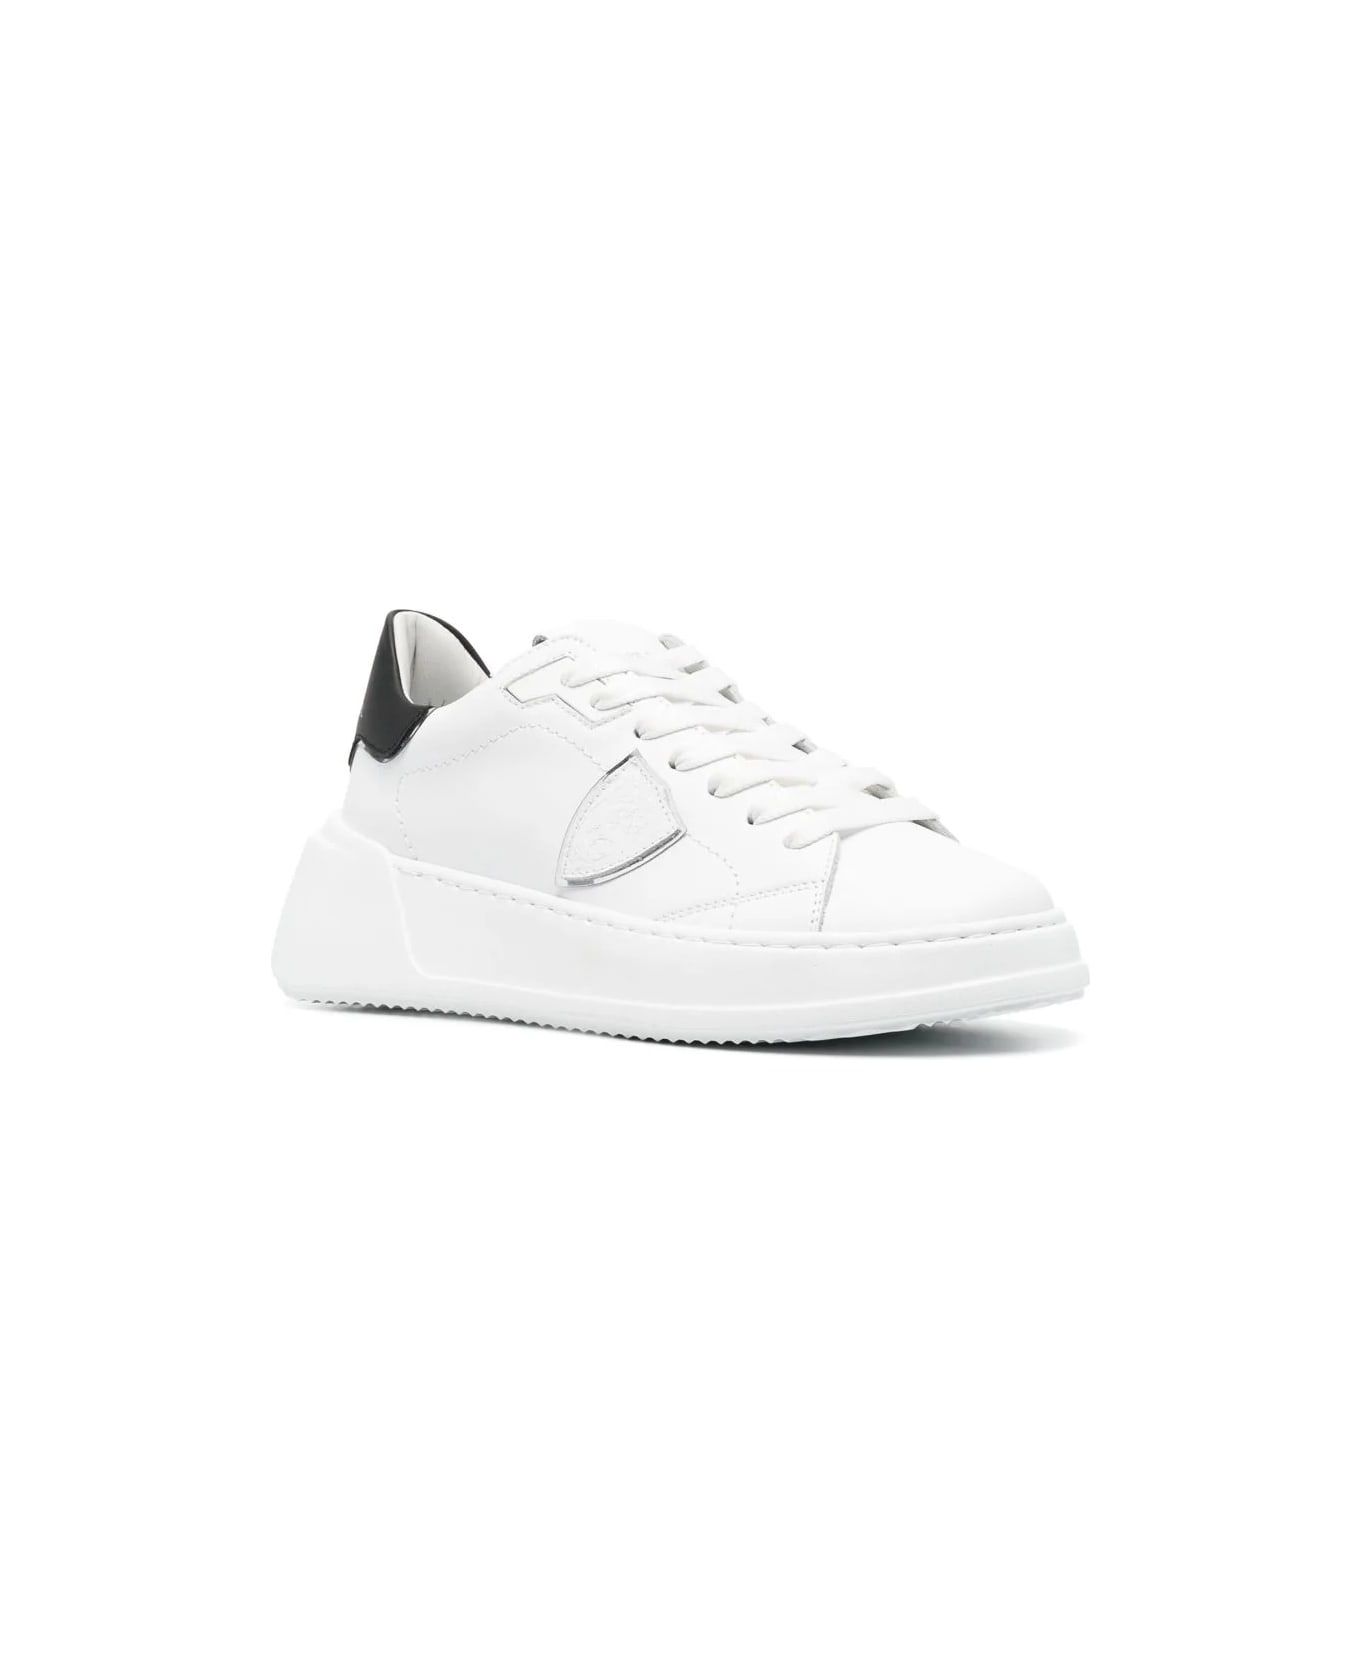 Philippe Model Tres Temple Sneakers - White And Black - White スニーカー